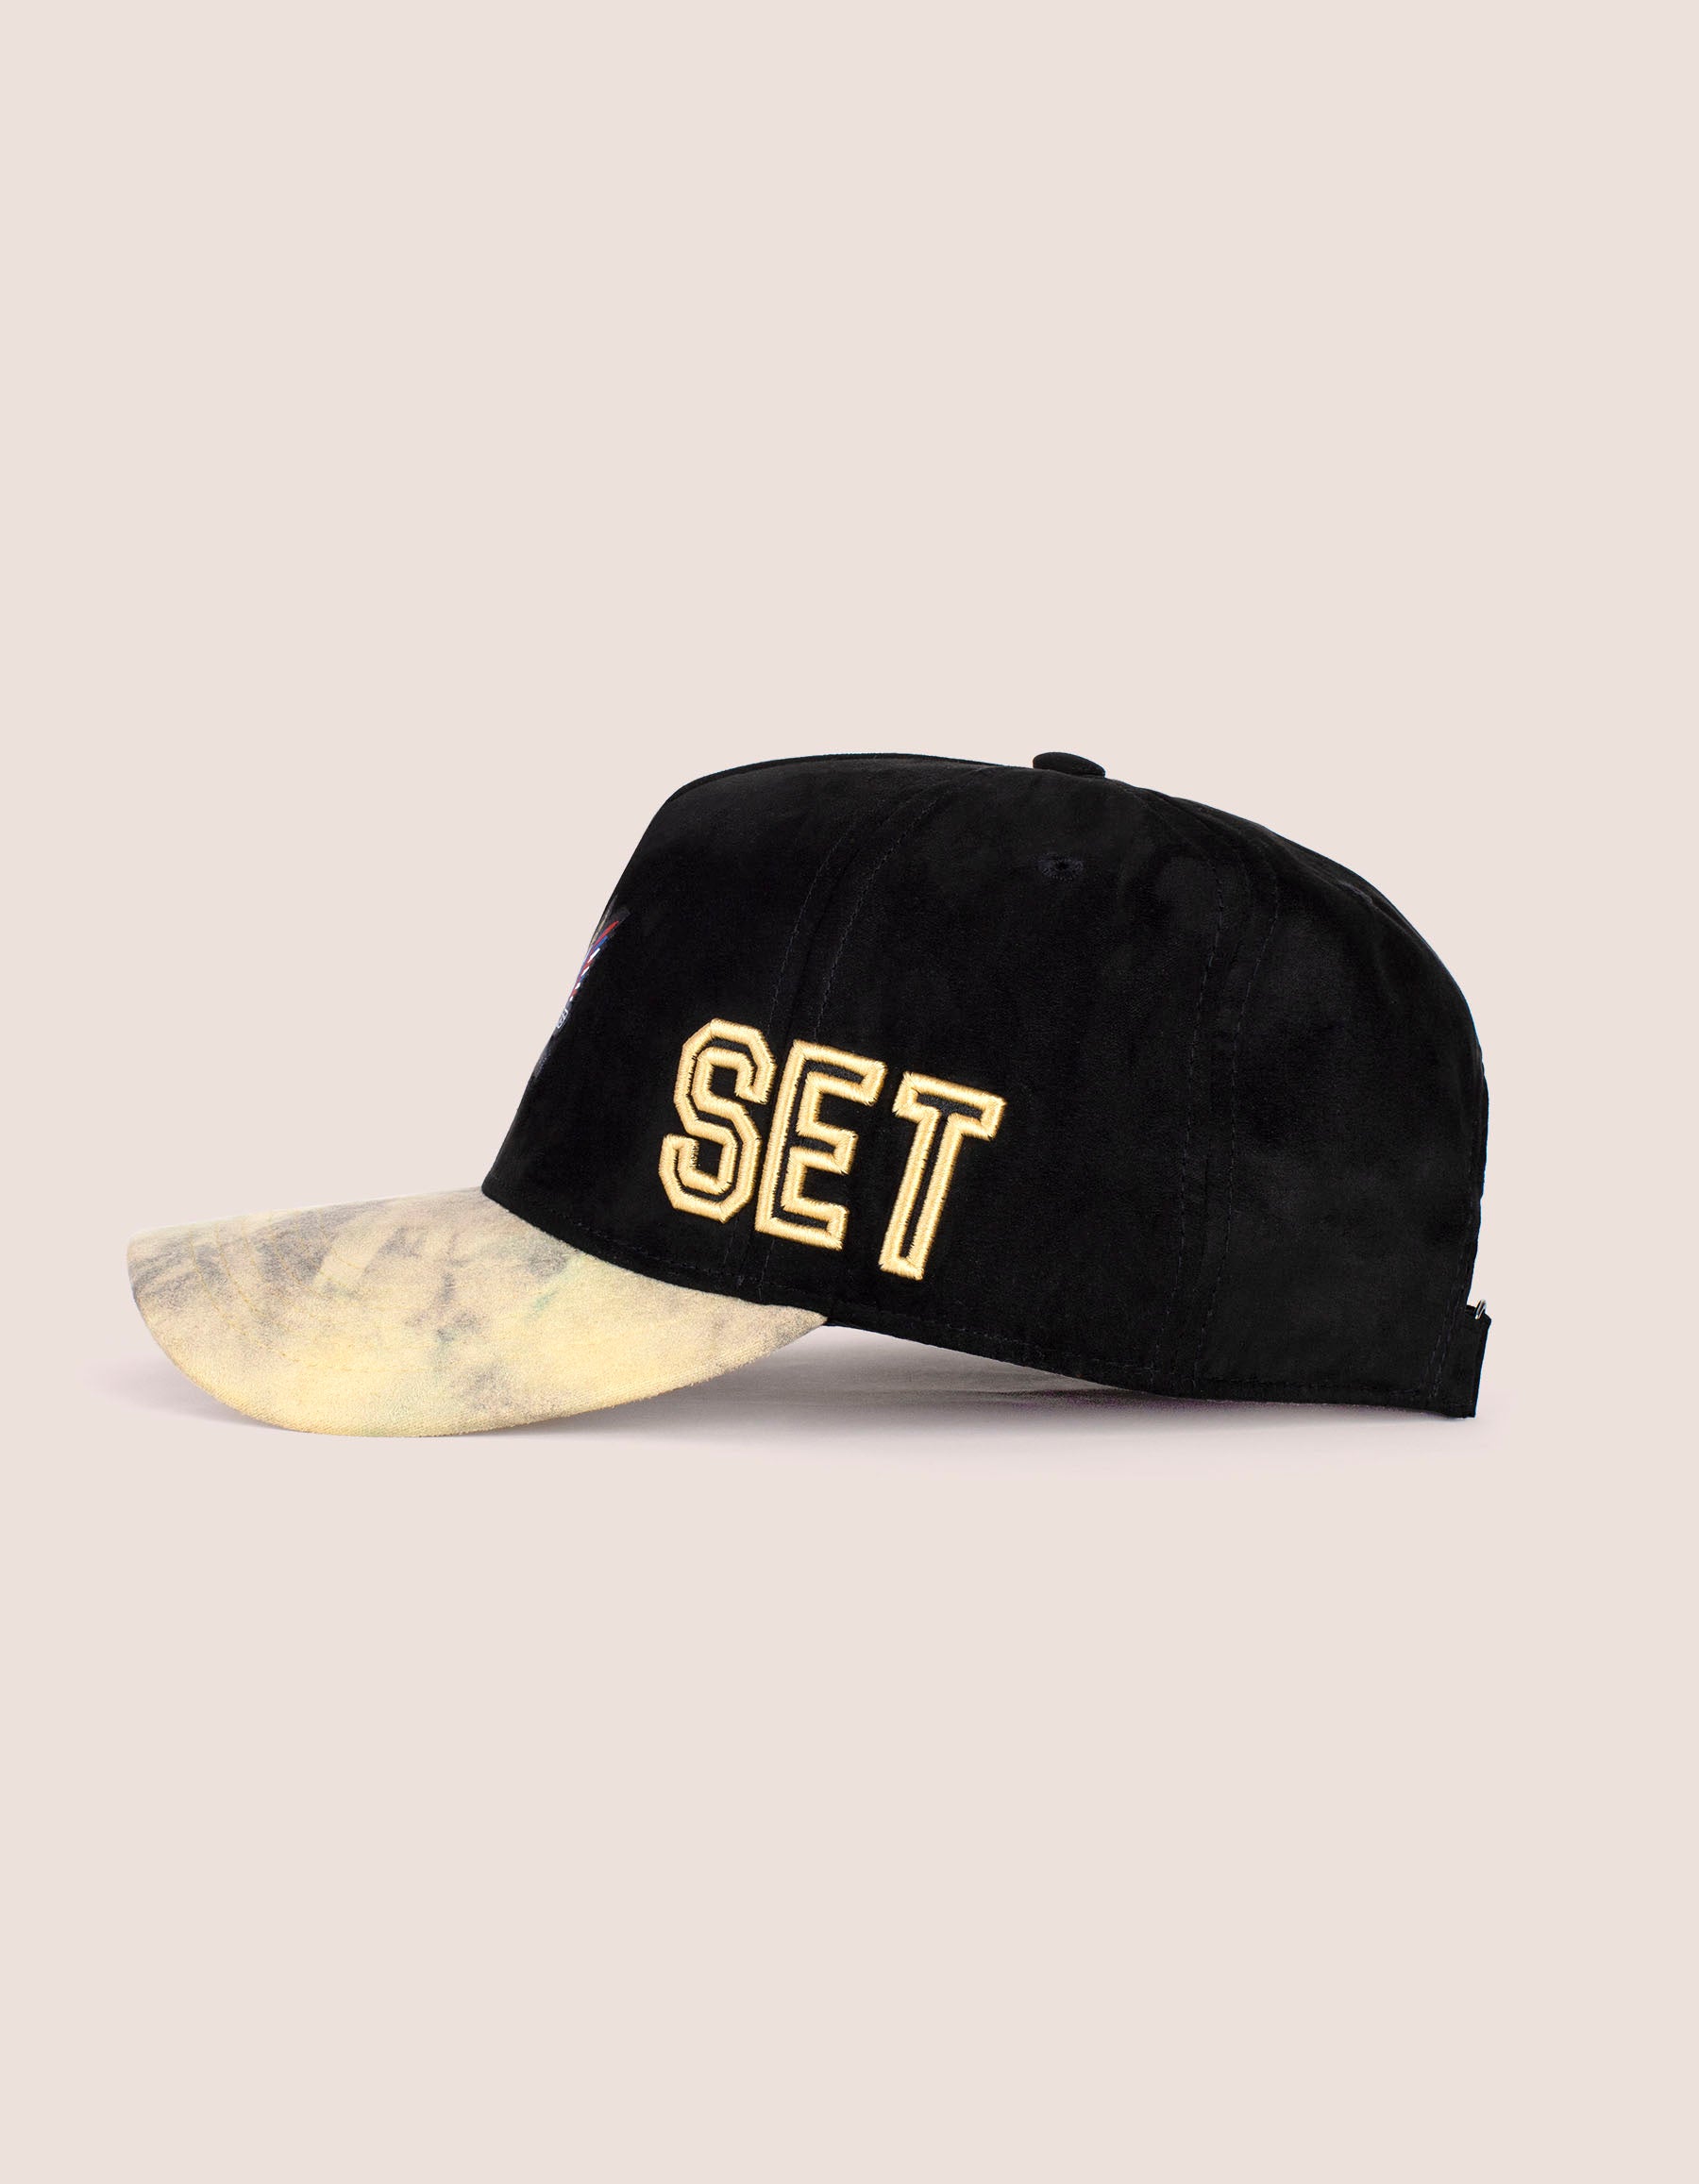 DIPSET COUTURE BLK/YELLOW Suede ROCKSTAR HAT